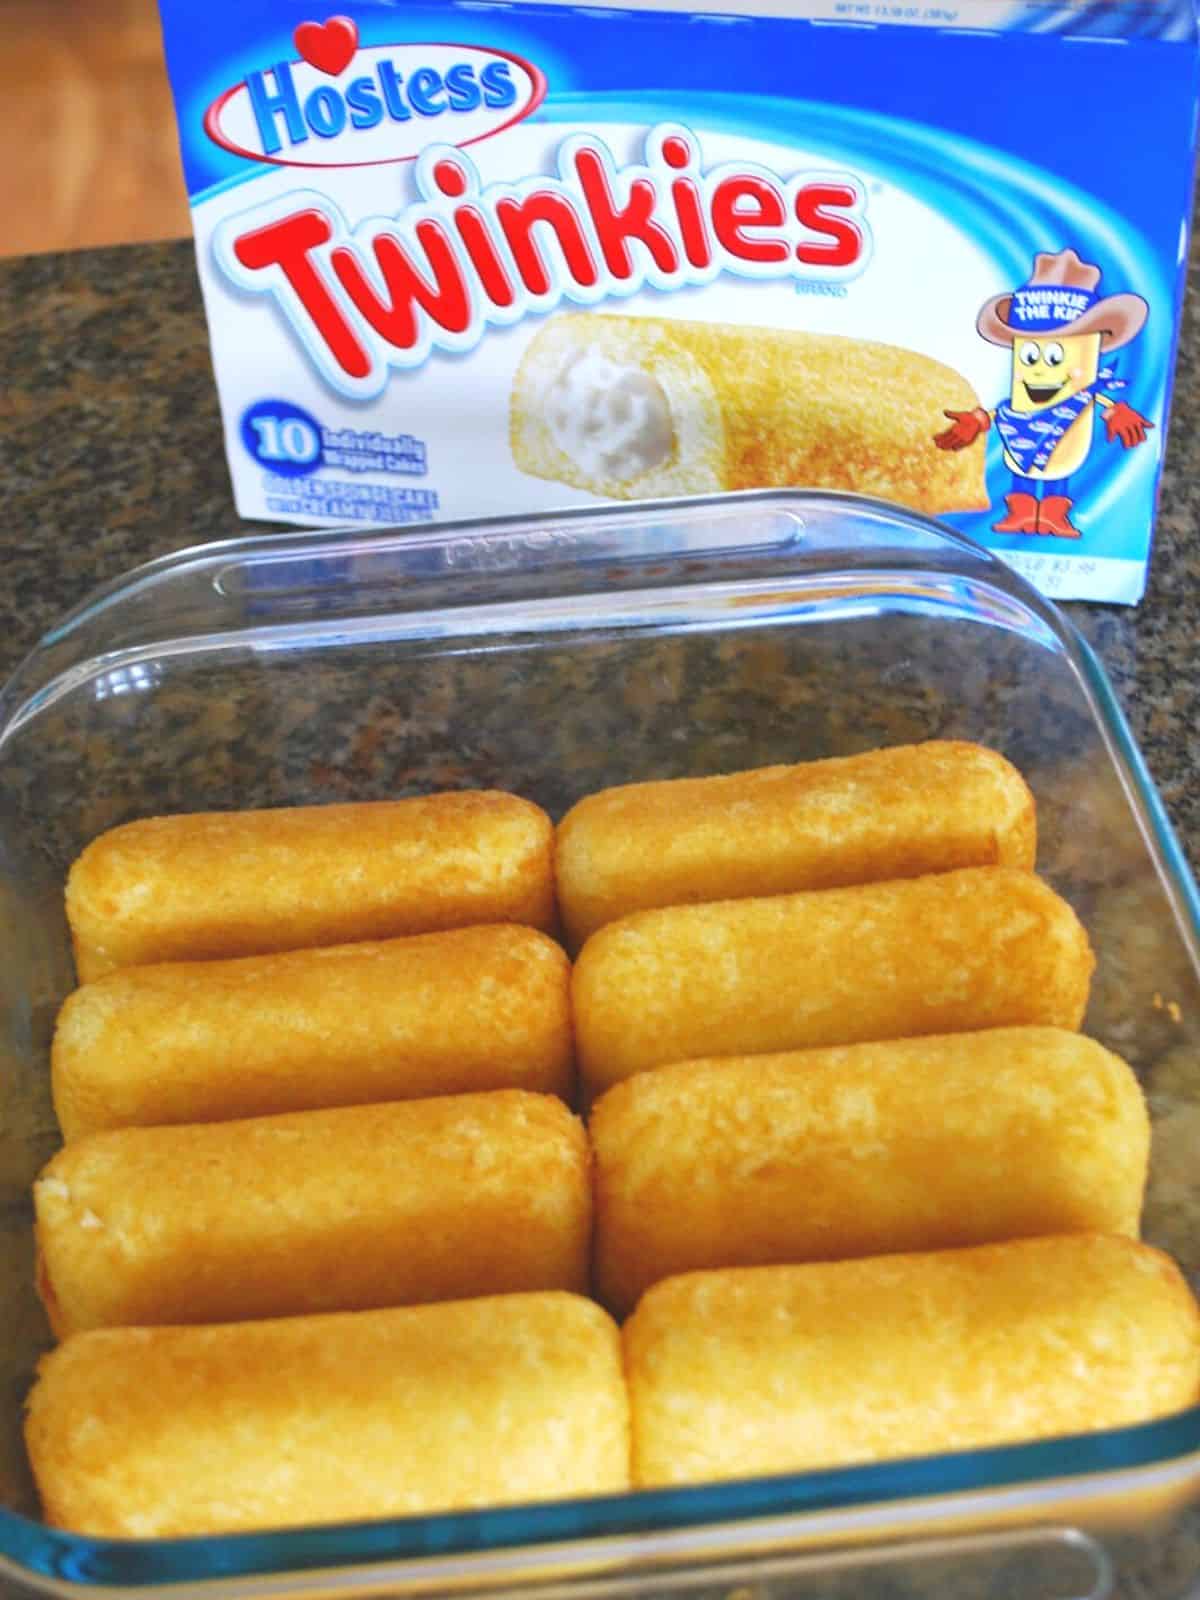 twinkies in pan with box of twinkies in background.